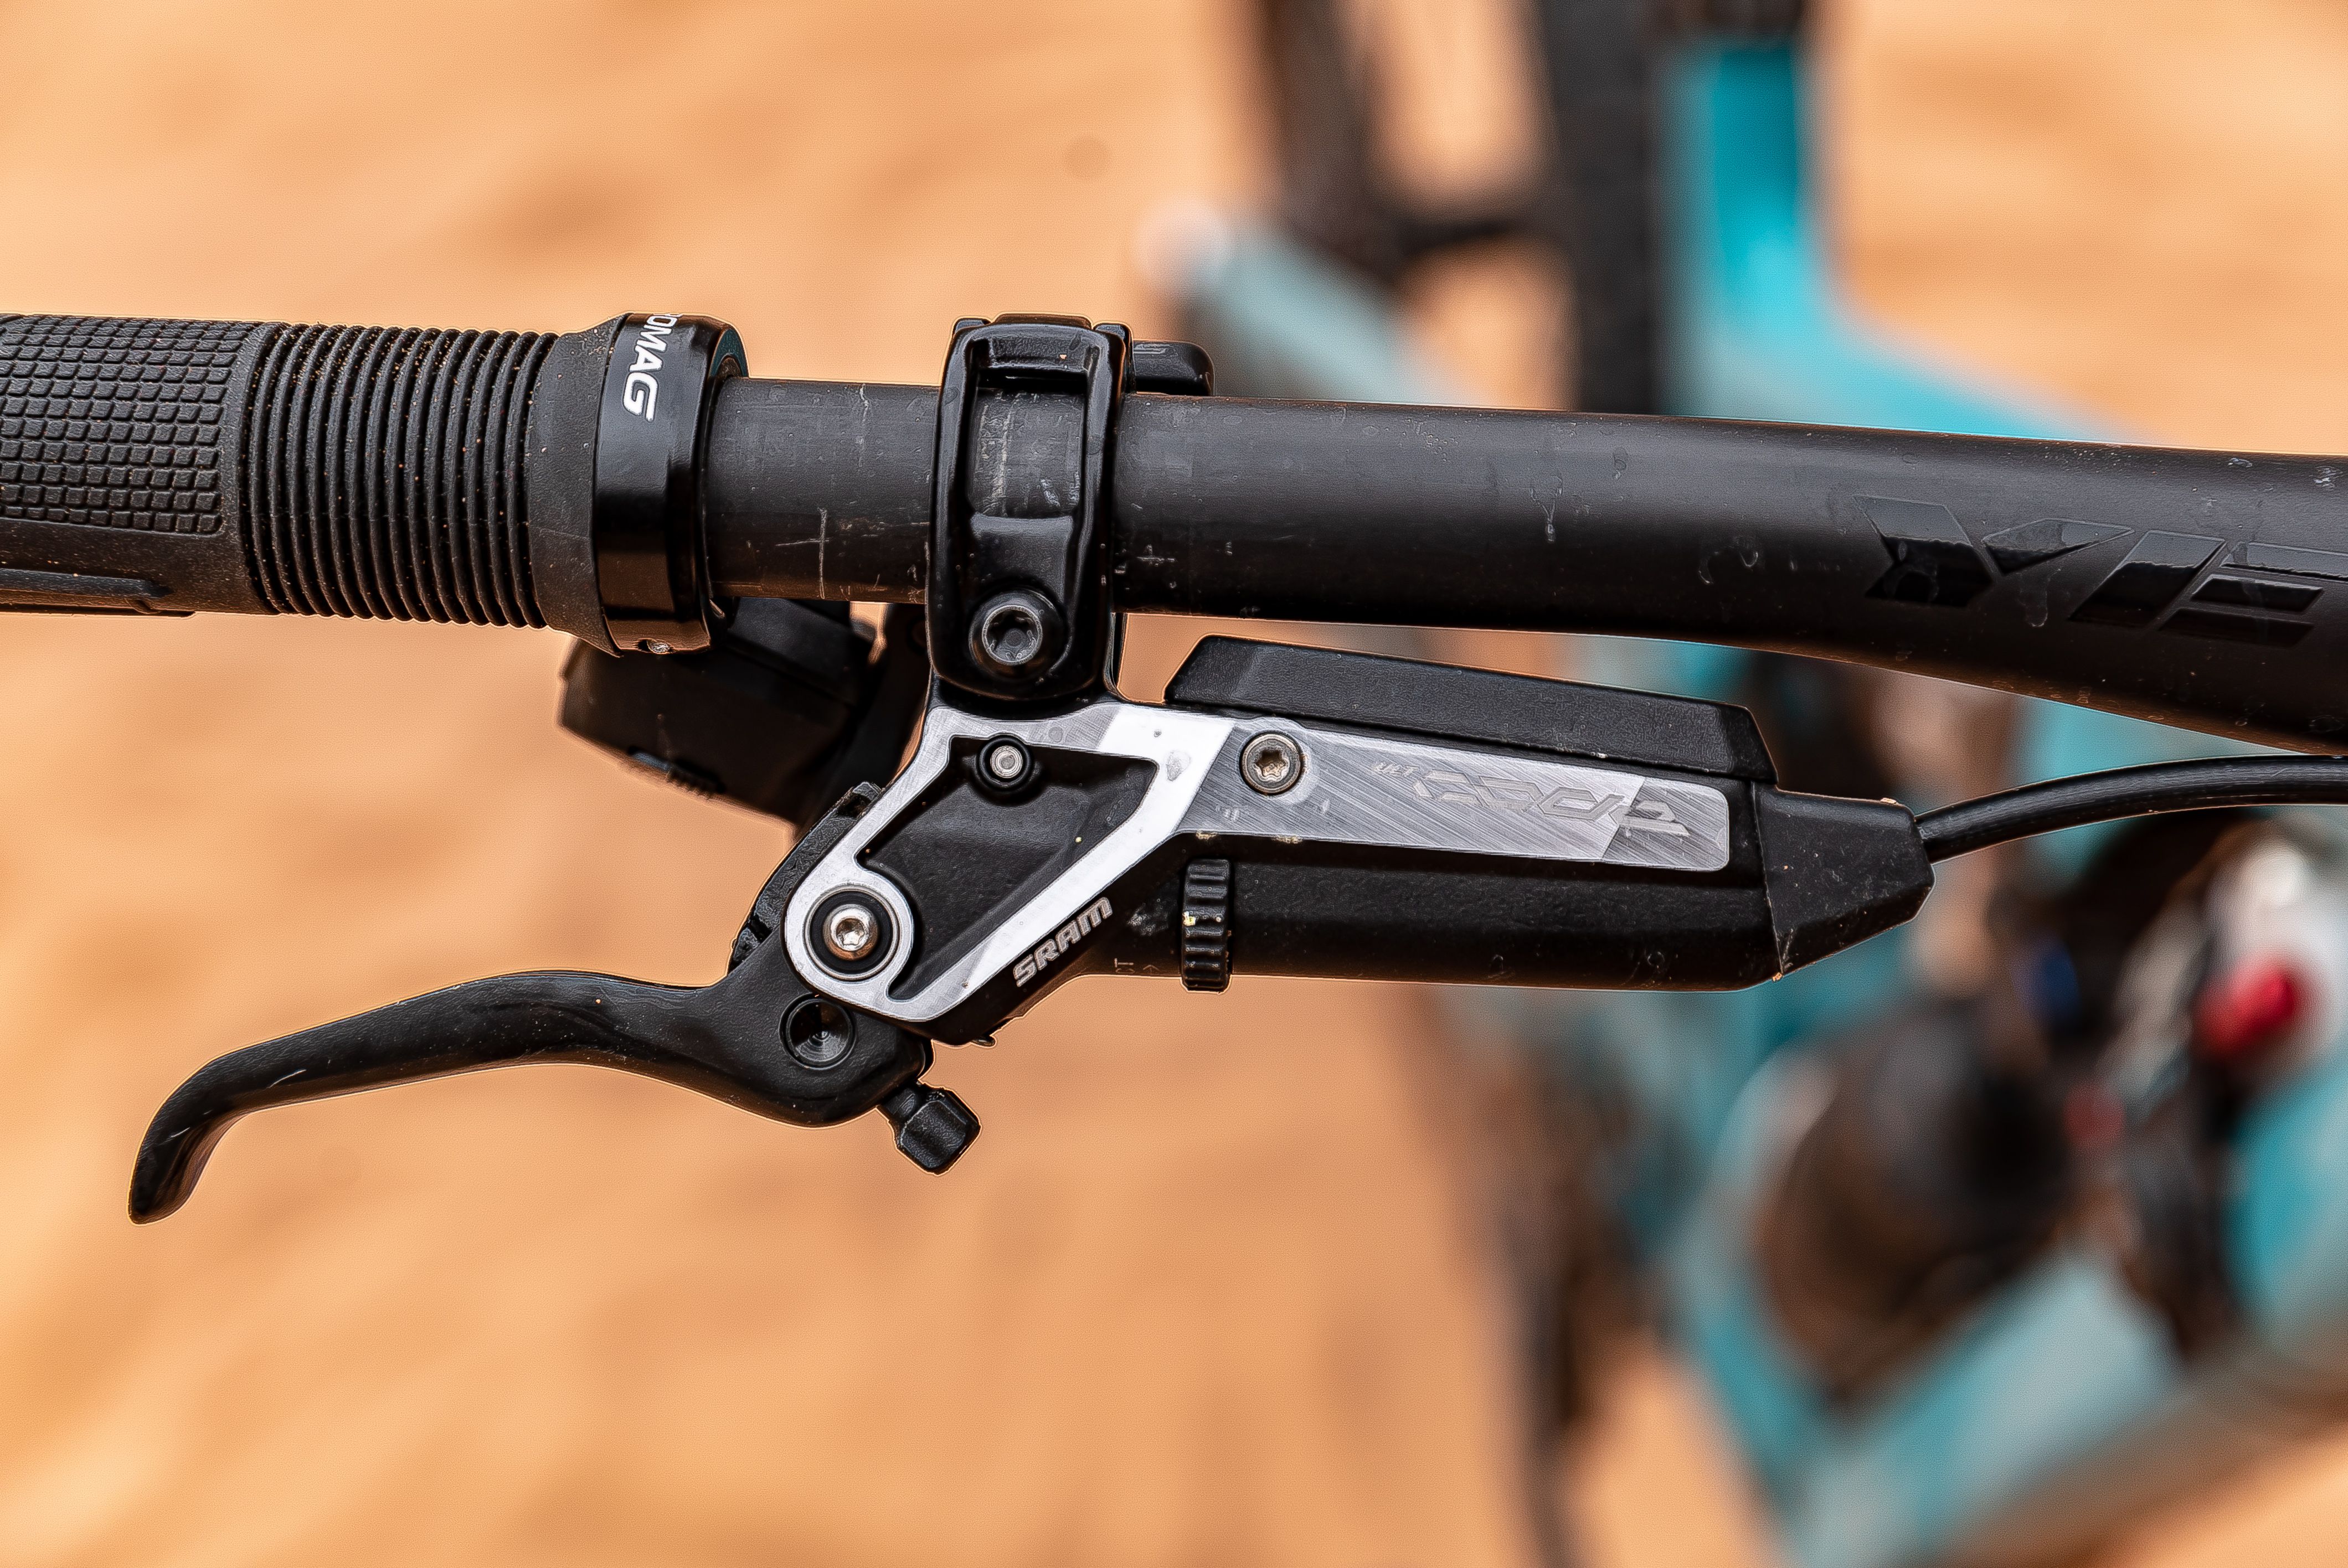 SRAM’s Stealth brakes put the reservoir and hose closer to the bar. Code Ultimate (ULT) shown. 